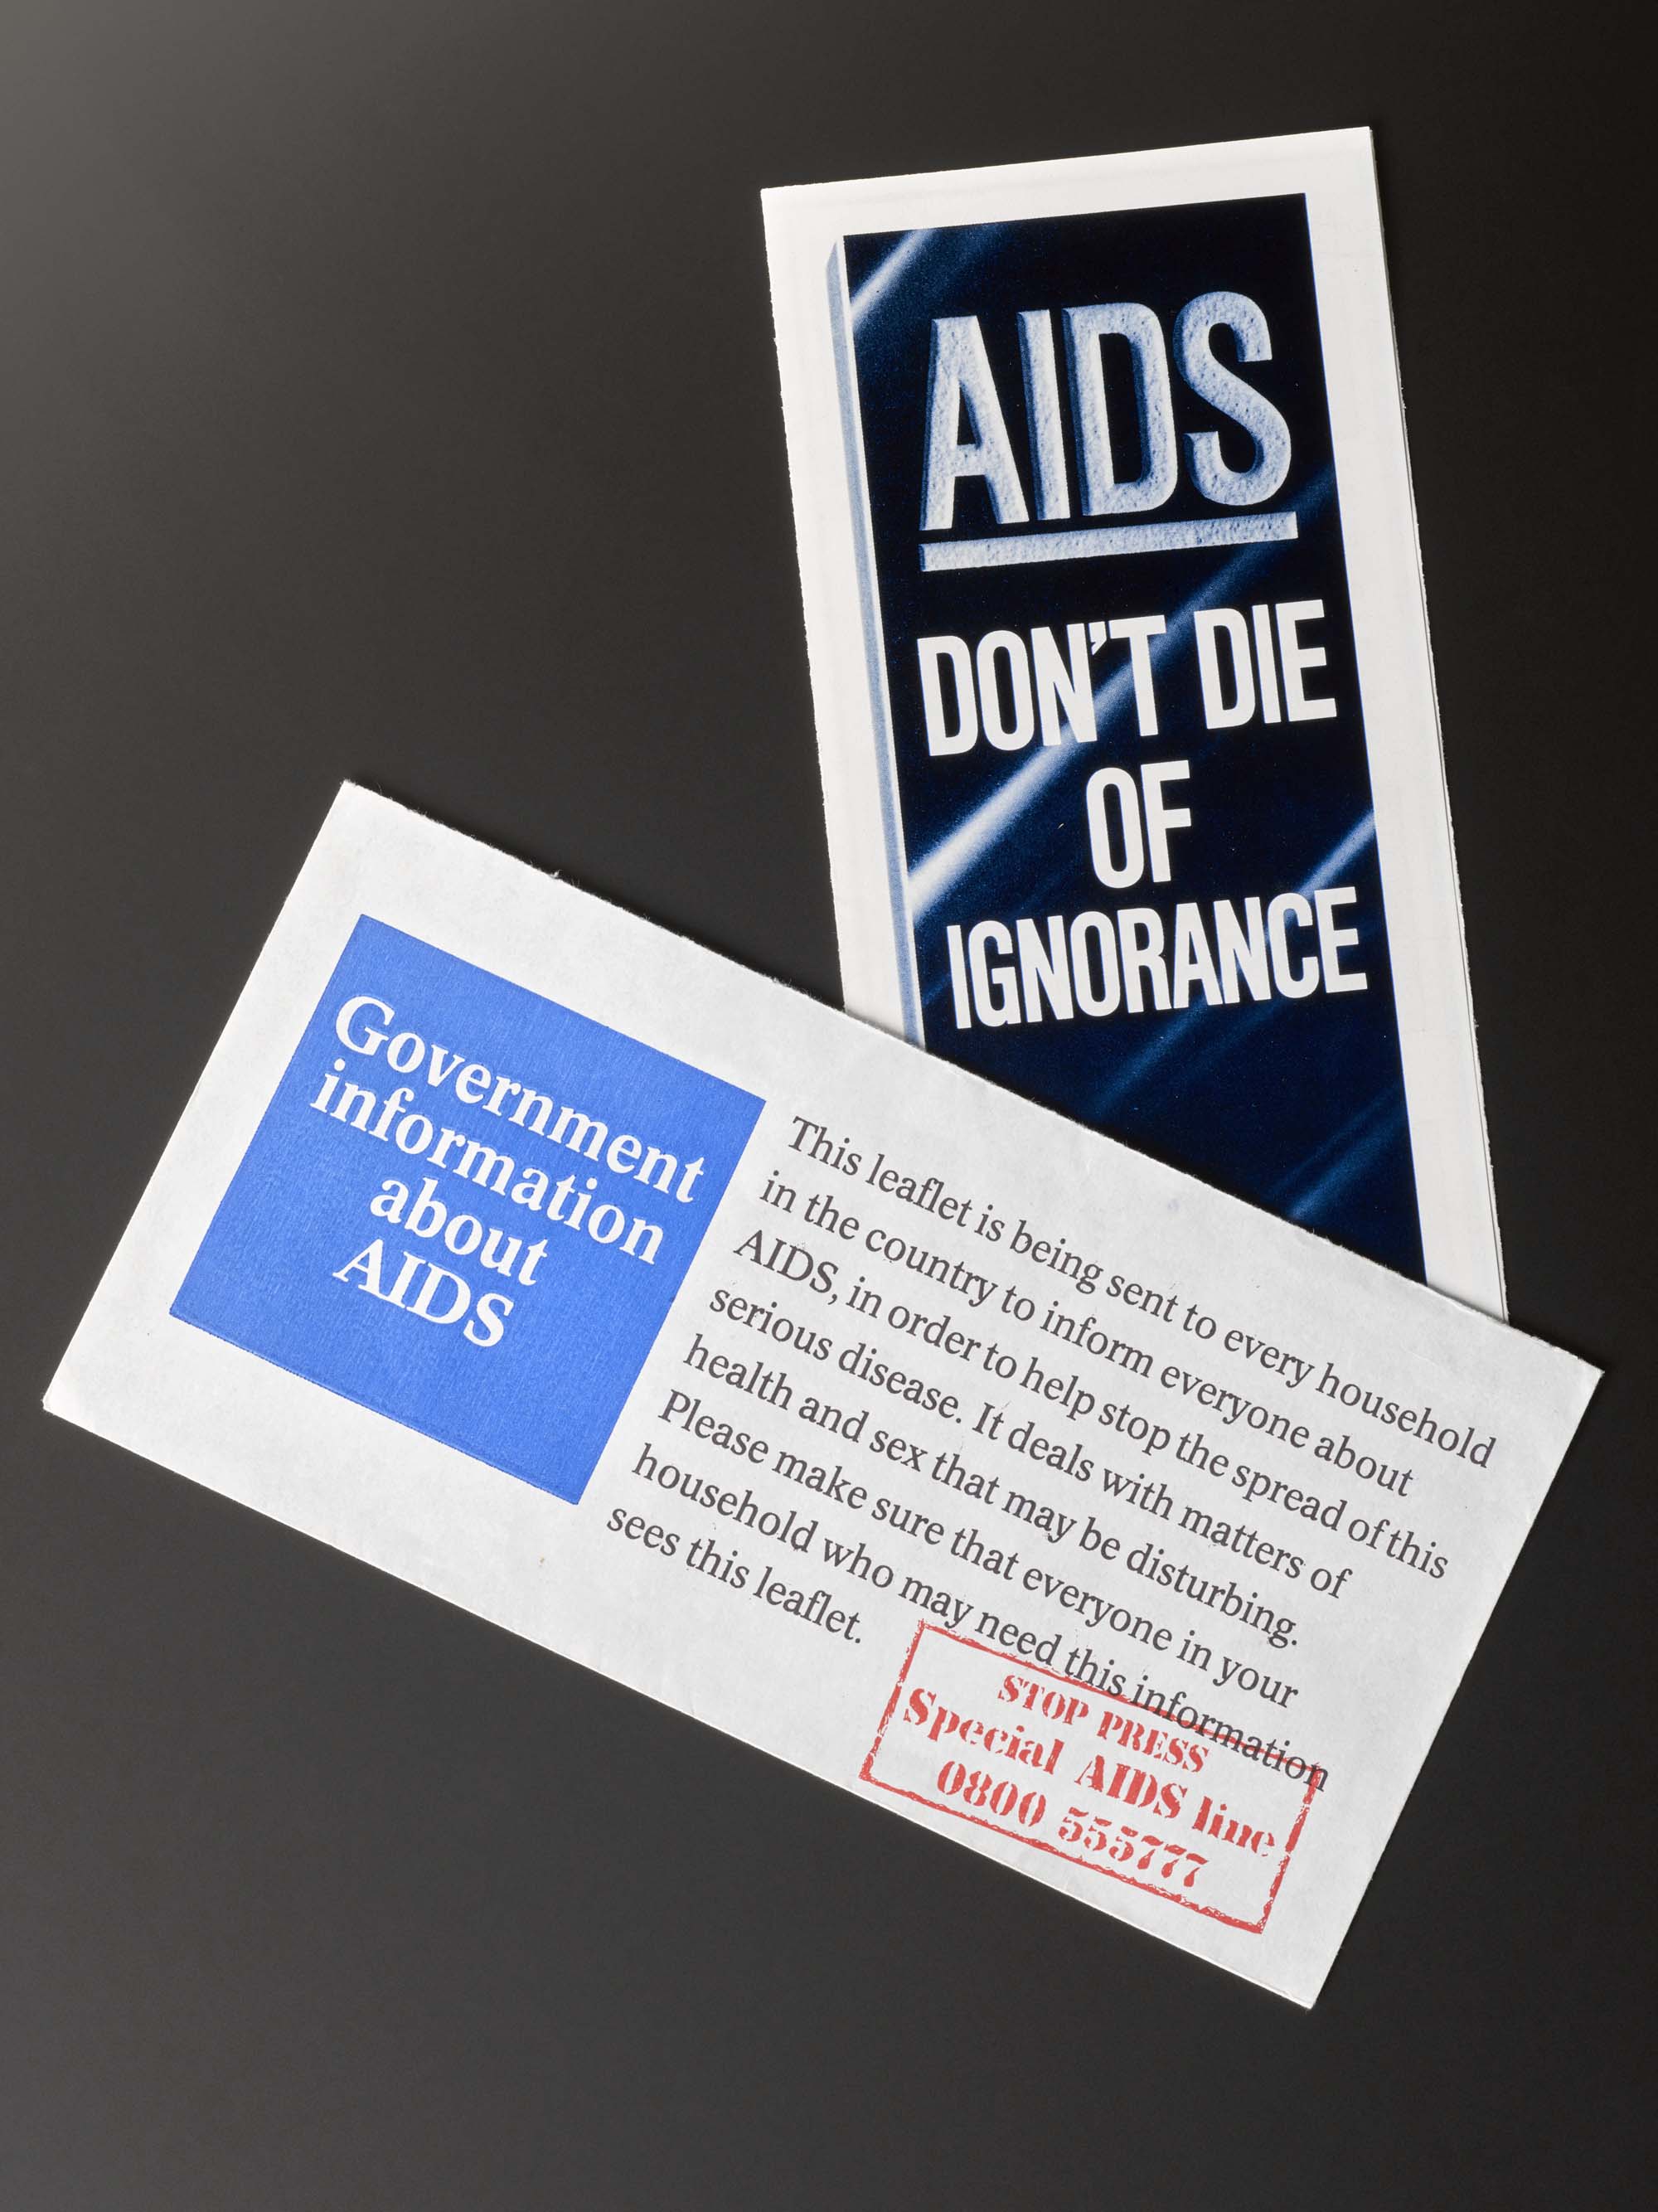 A leaflet for the 1986 “AIDS: Don’t Die of Ignorance” awareness campaign -